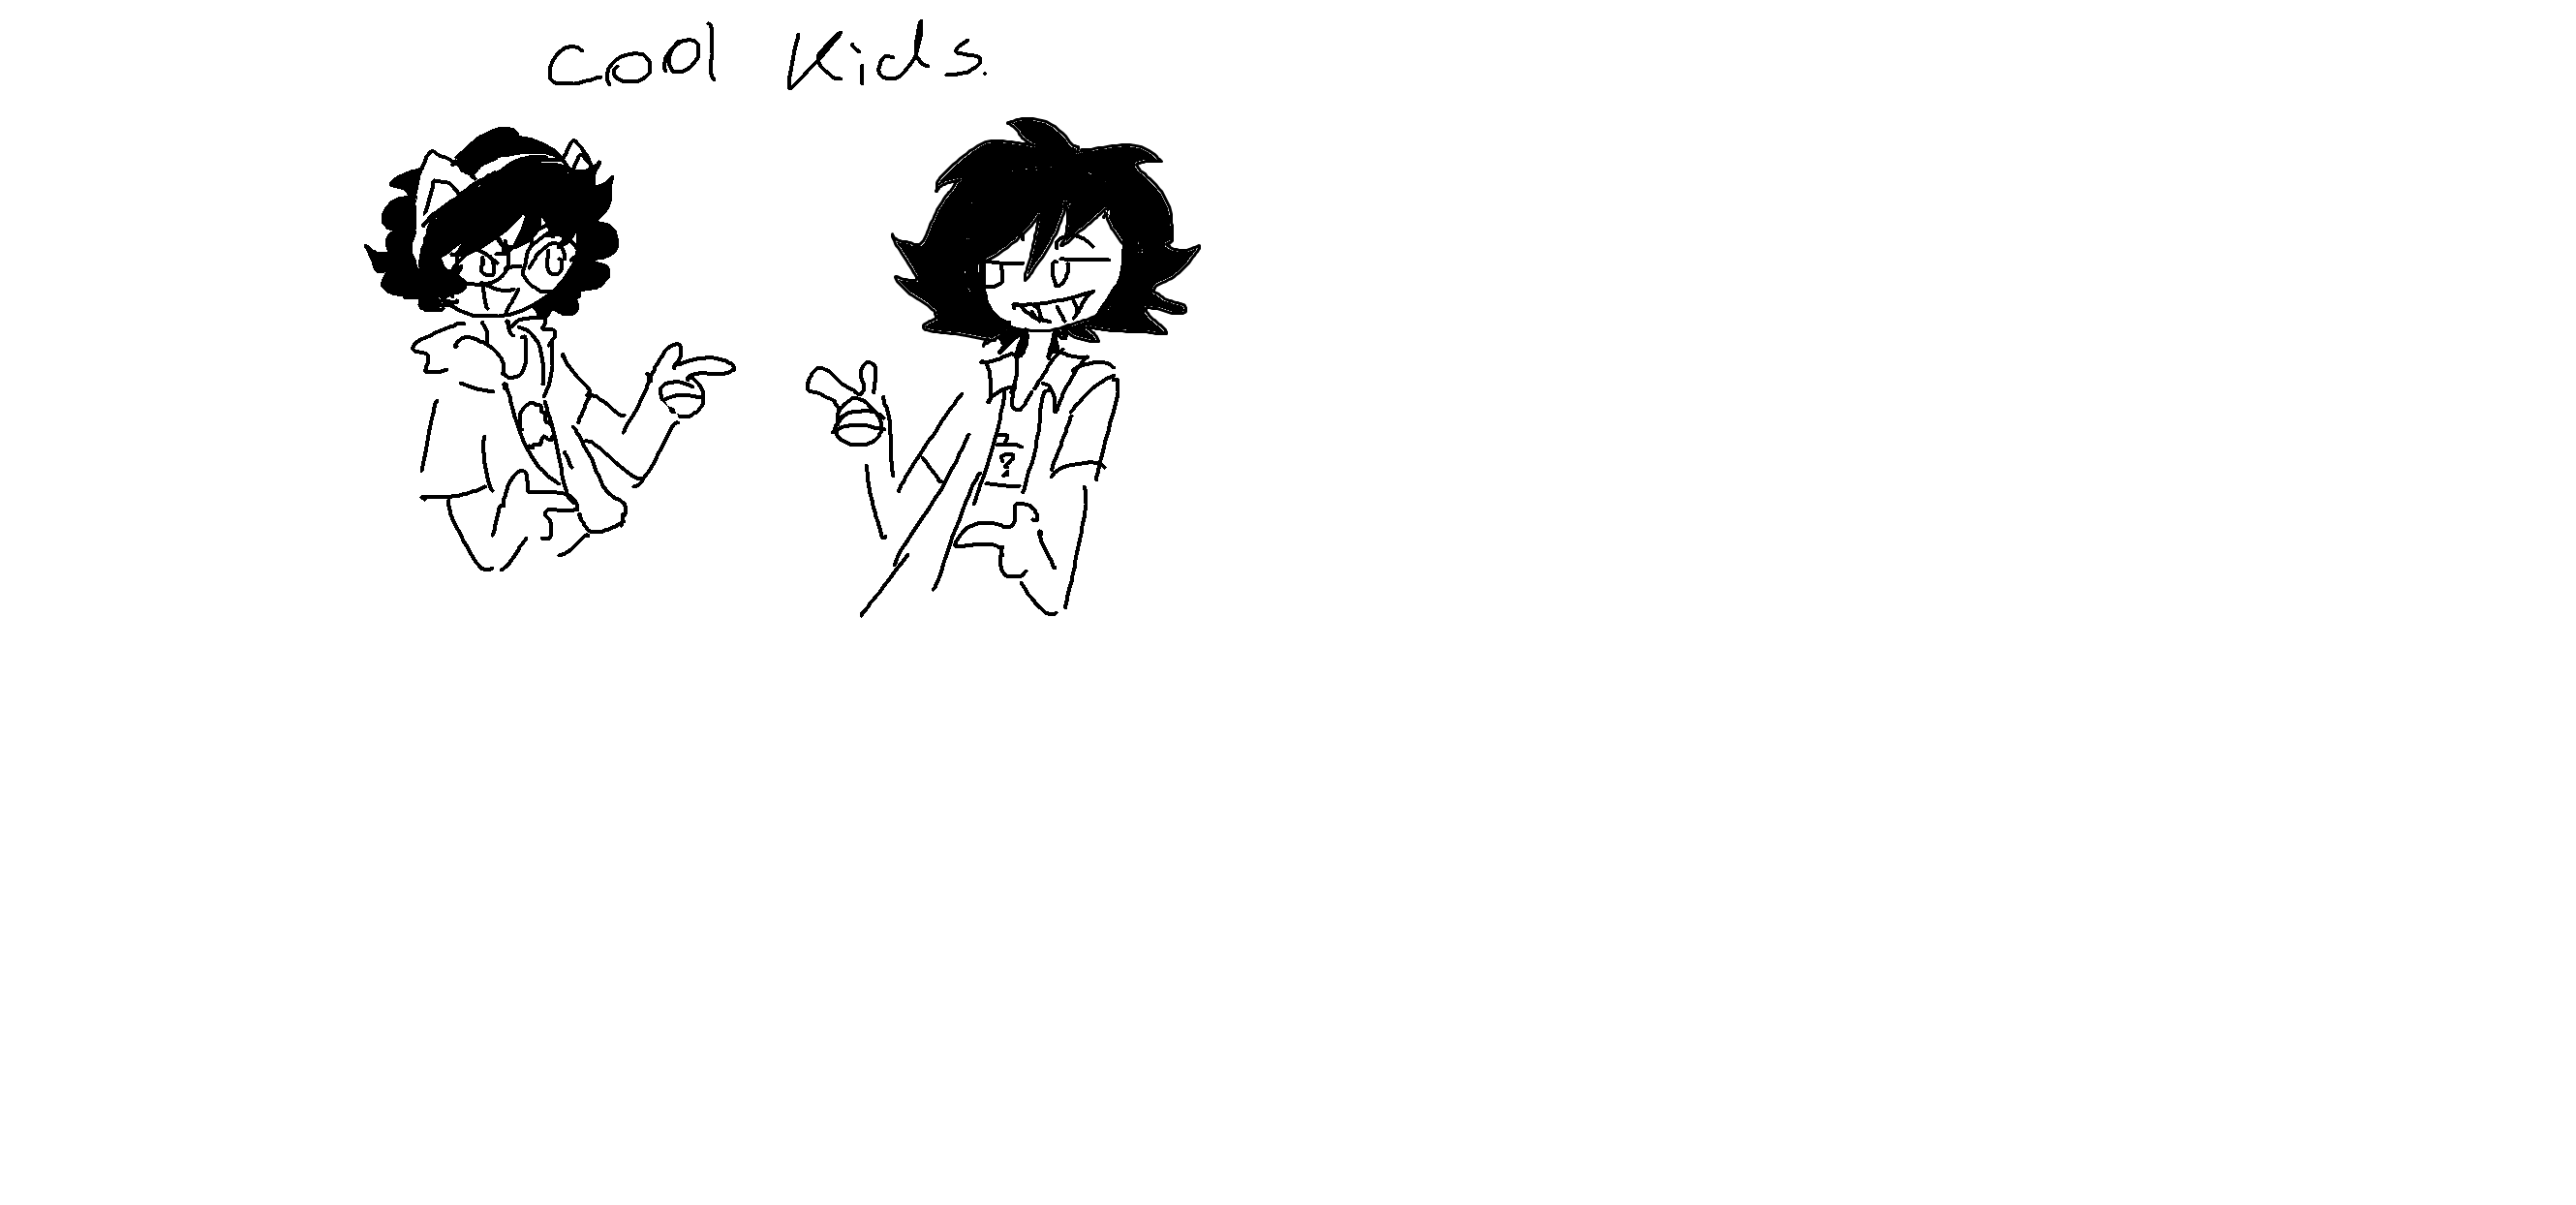 my and tobys kidsonas being cool